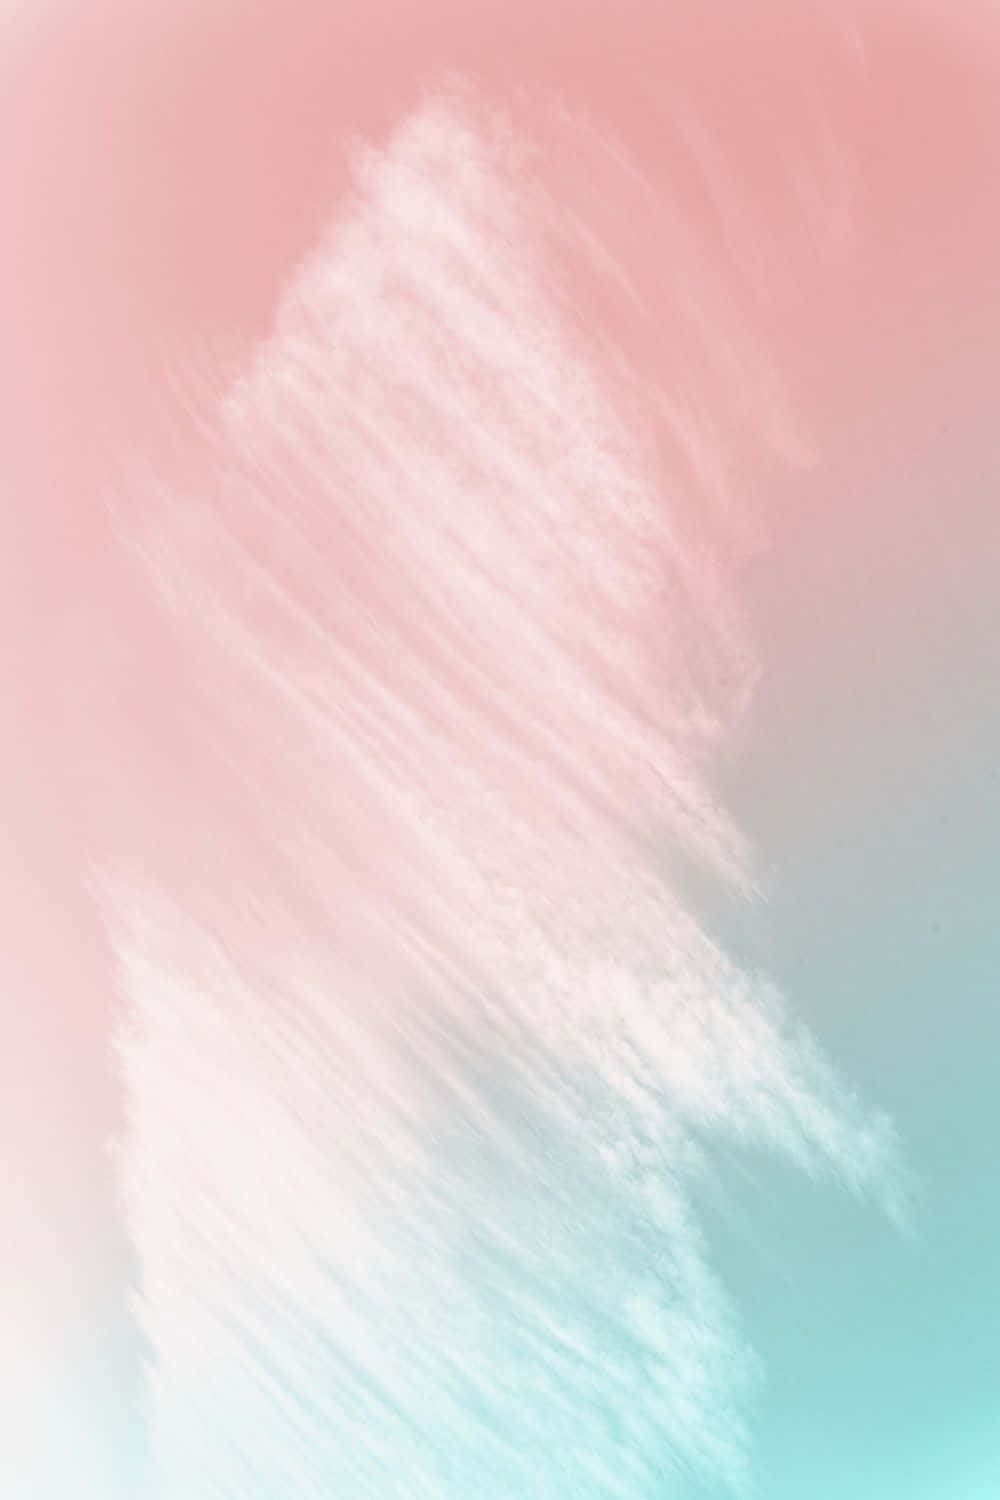 Thin Clouds Pink And Blue Aesthetic Wallpaper